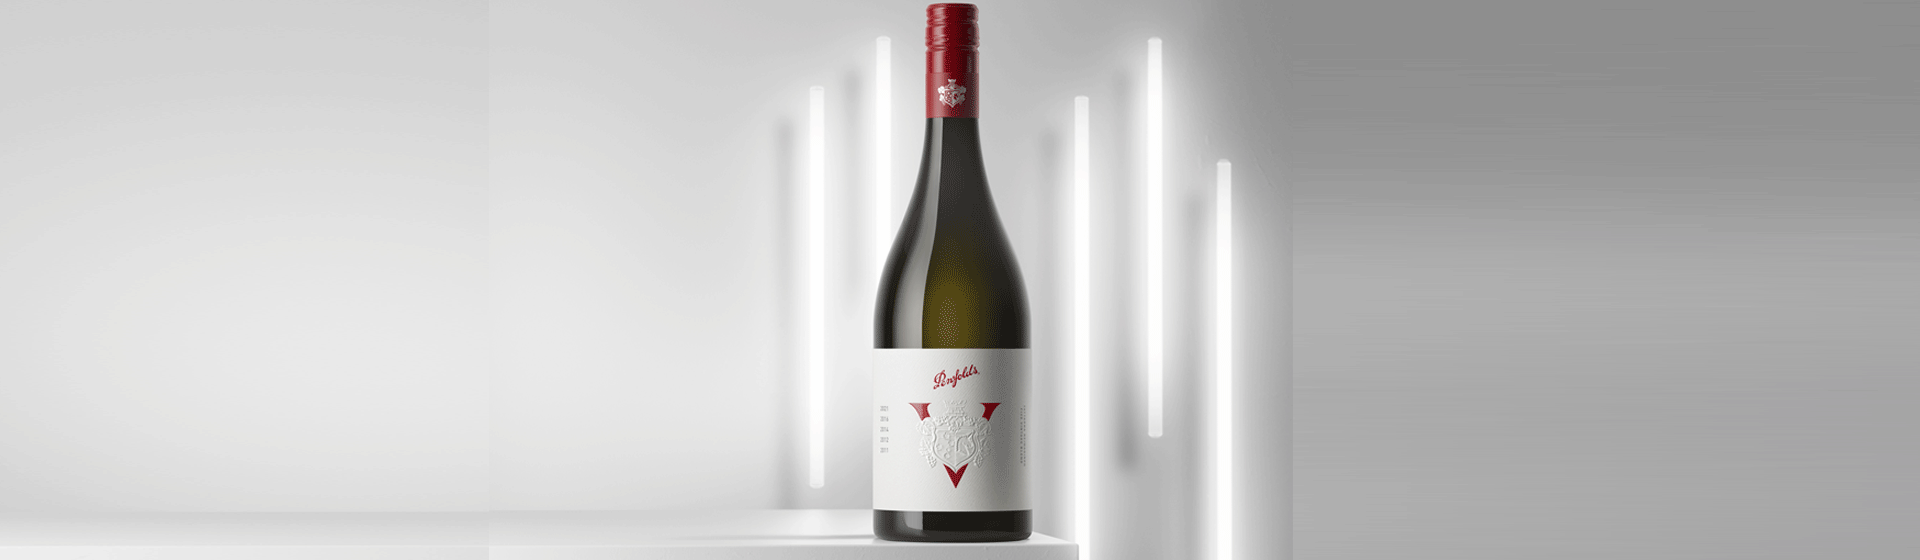 Introducing Penfolds V | A Chardonnay Like No Other